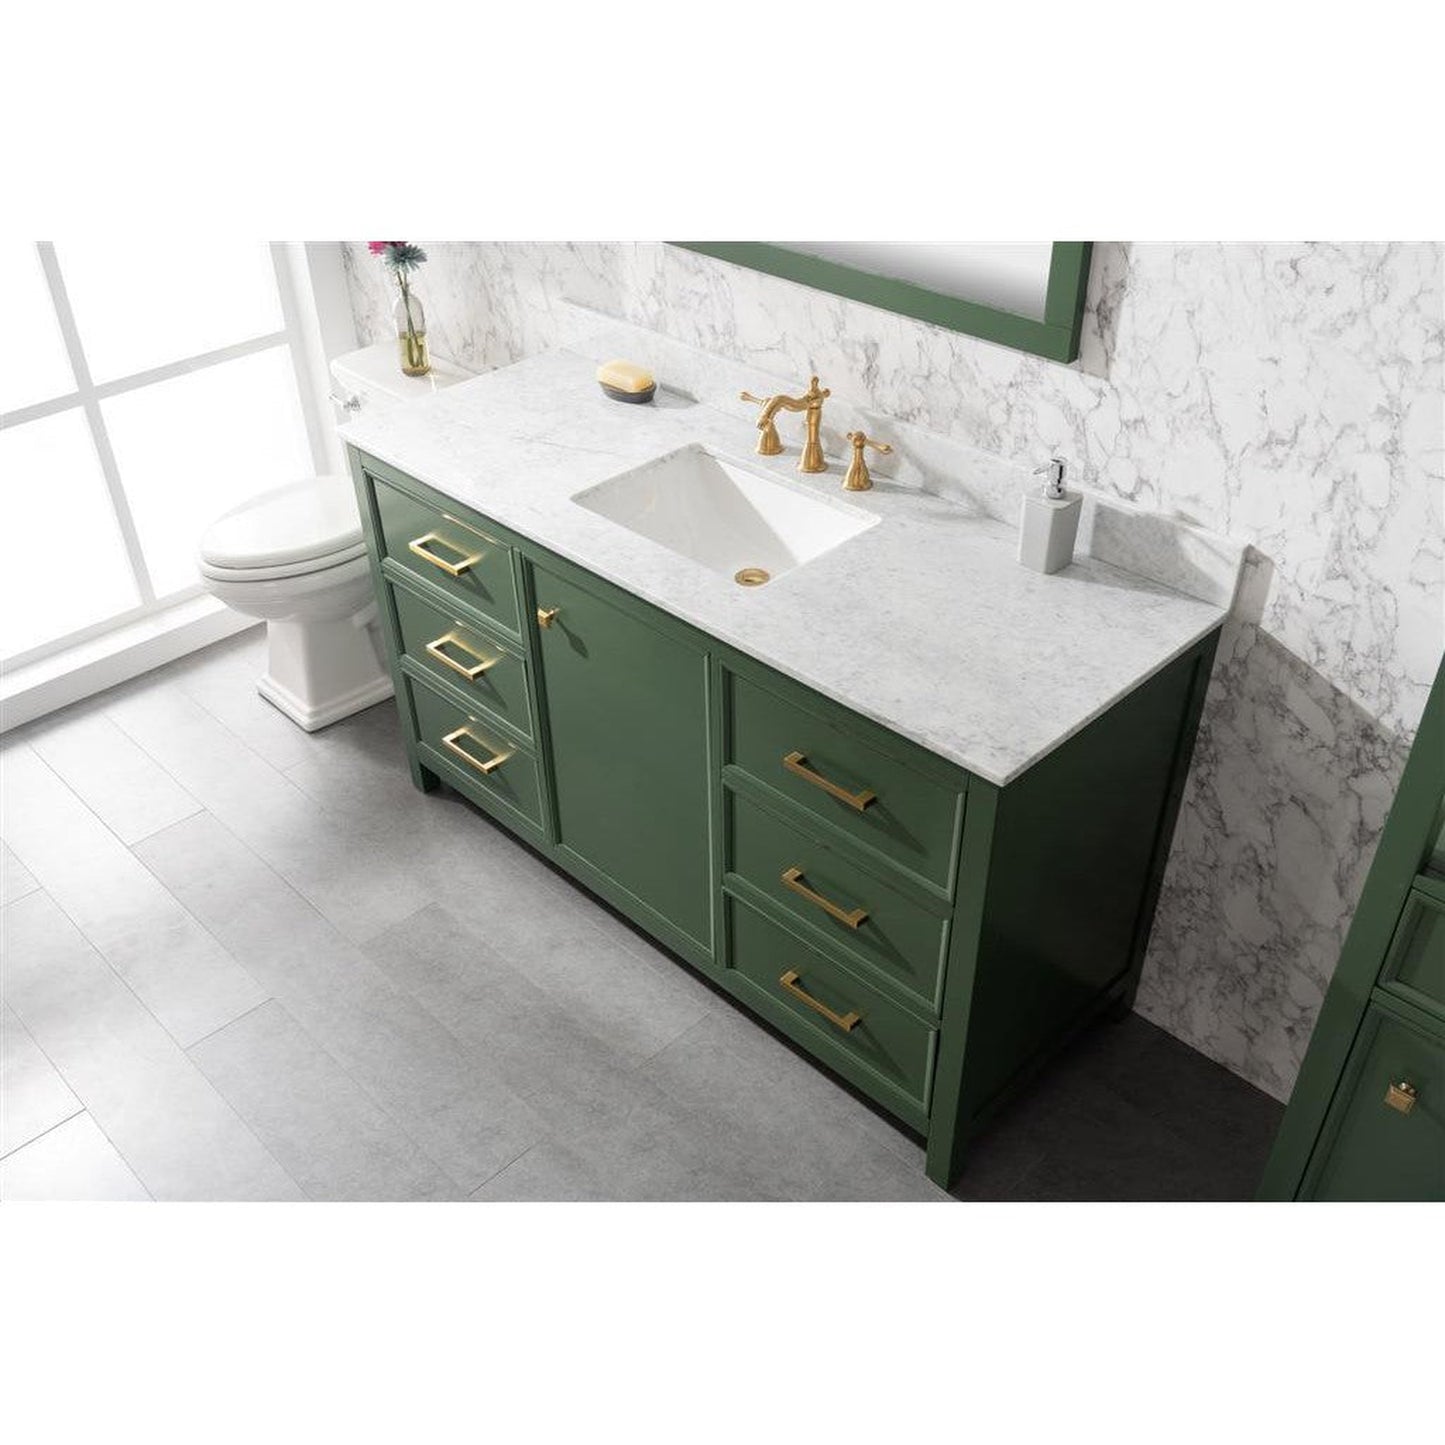 Legion Furniture WLF2160S 60" Vogue Green Freestanding Vanity With White Carrara Marble Top and Single White Ceramic Sink